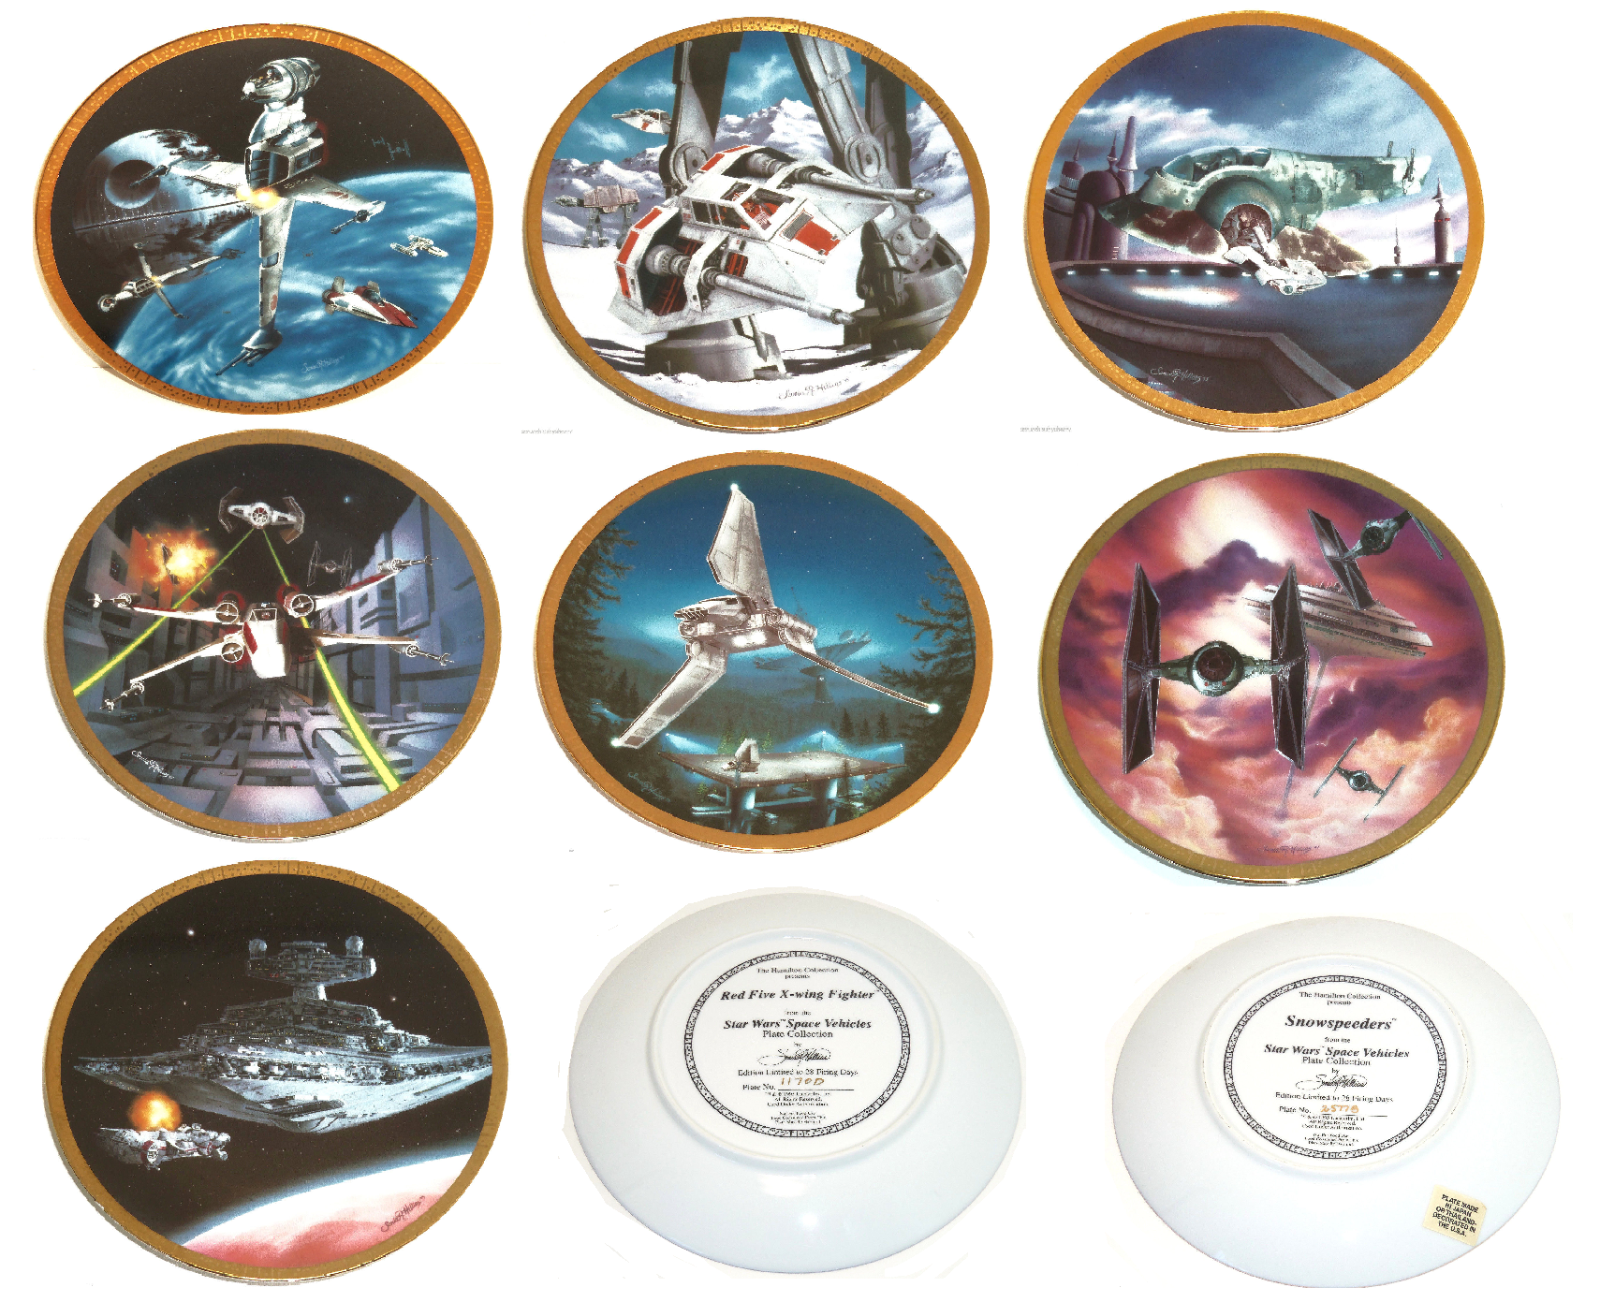 Star Wars Vehicles Collector Plate Hamilton Collection Sonia R Hillias - $49.95